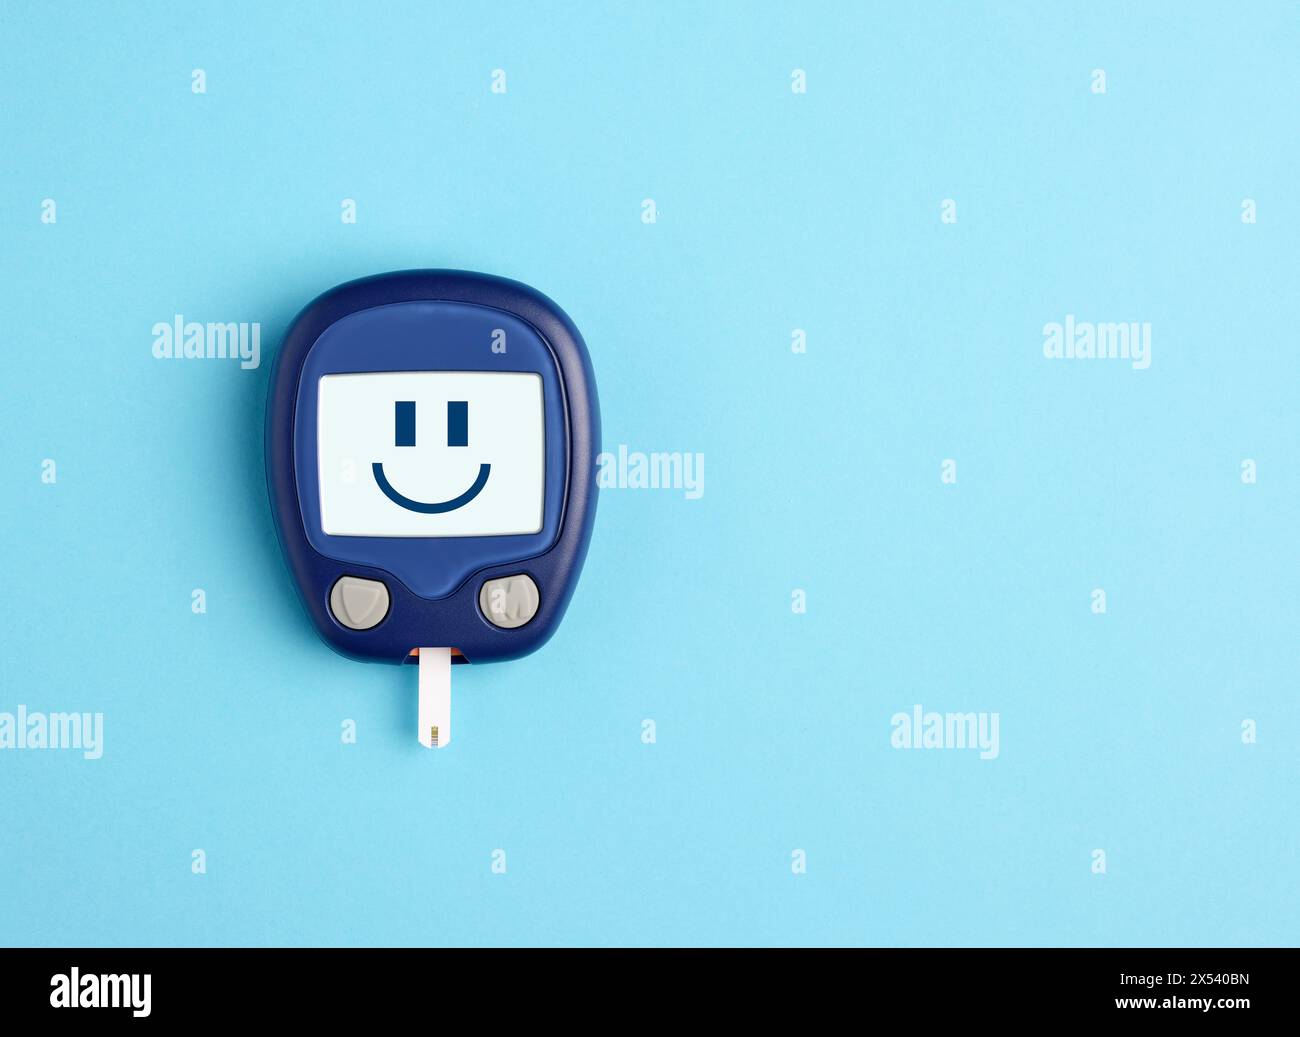 Normal or ideal blood sugar. Health care and blood glucose testing. Glucometer with a digital smiling happy face emoticon on blue background. Stock Photo